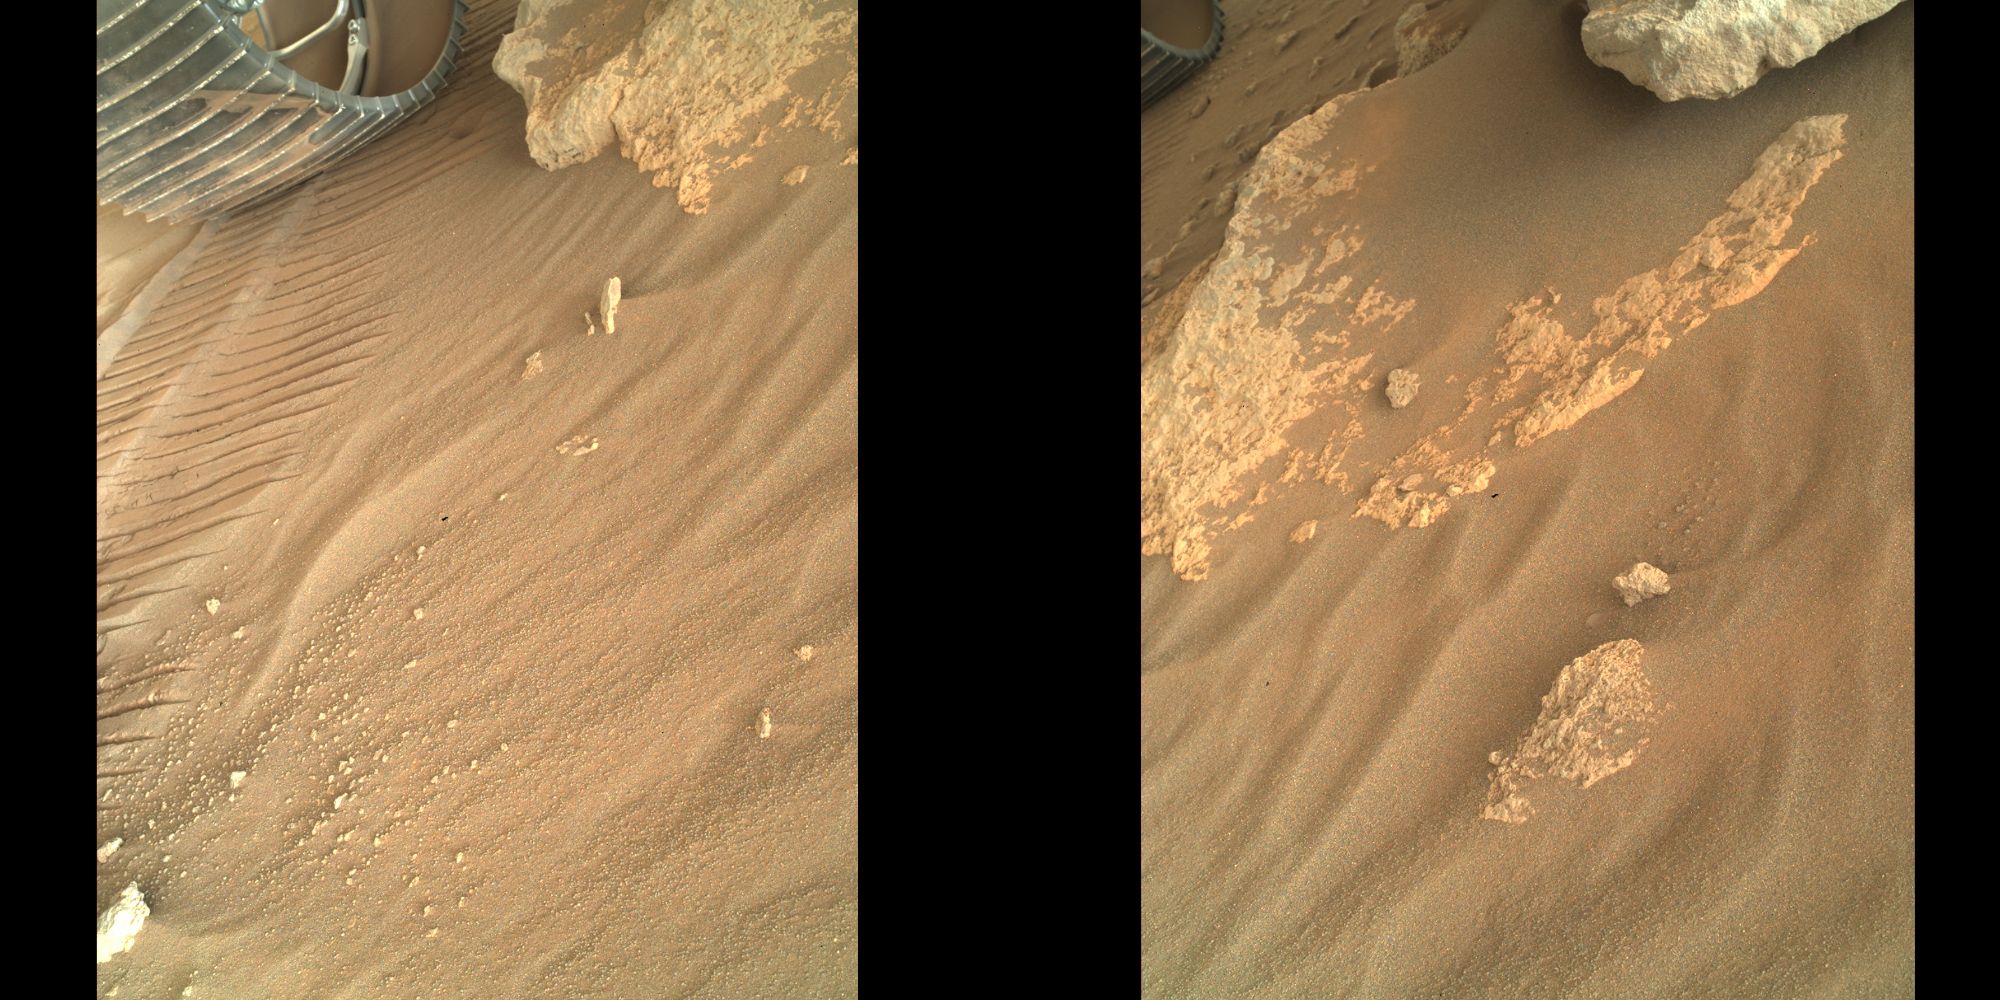 Two Perseverance photos of the Mars ground